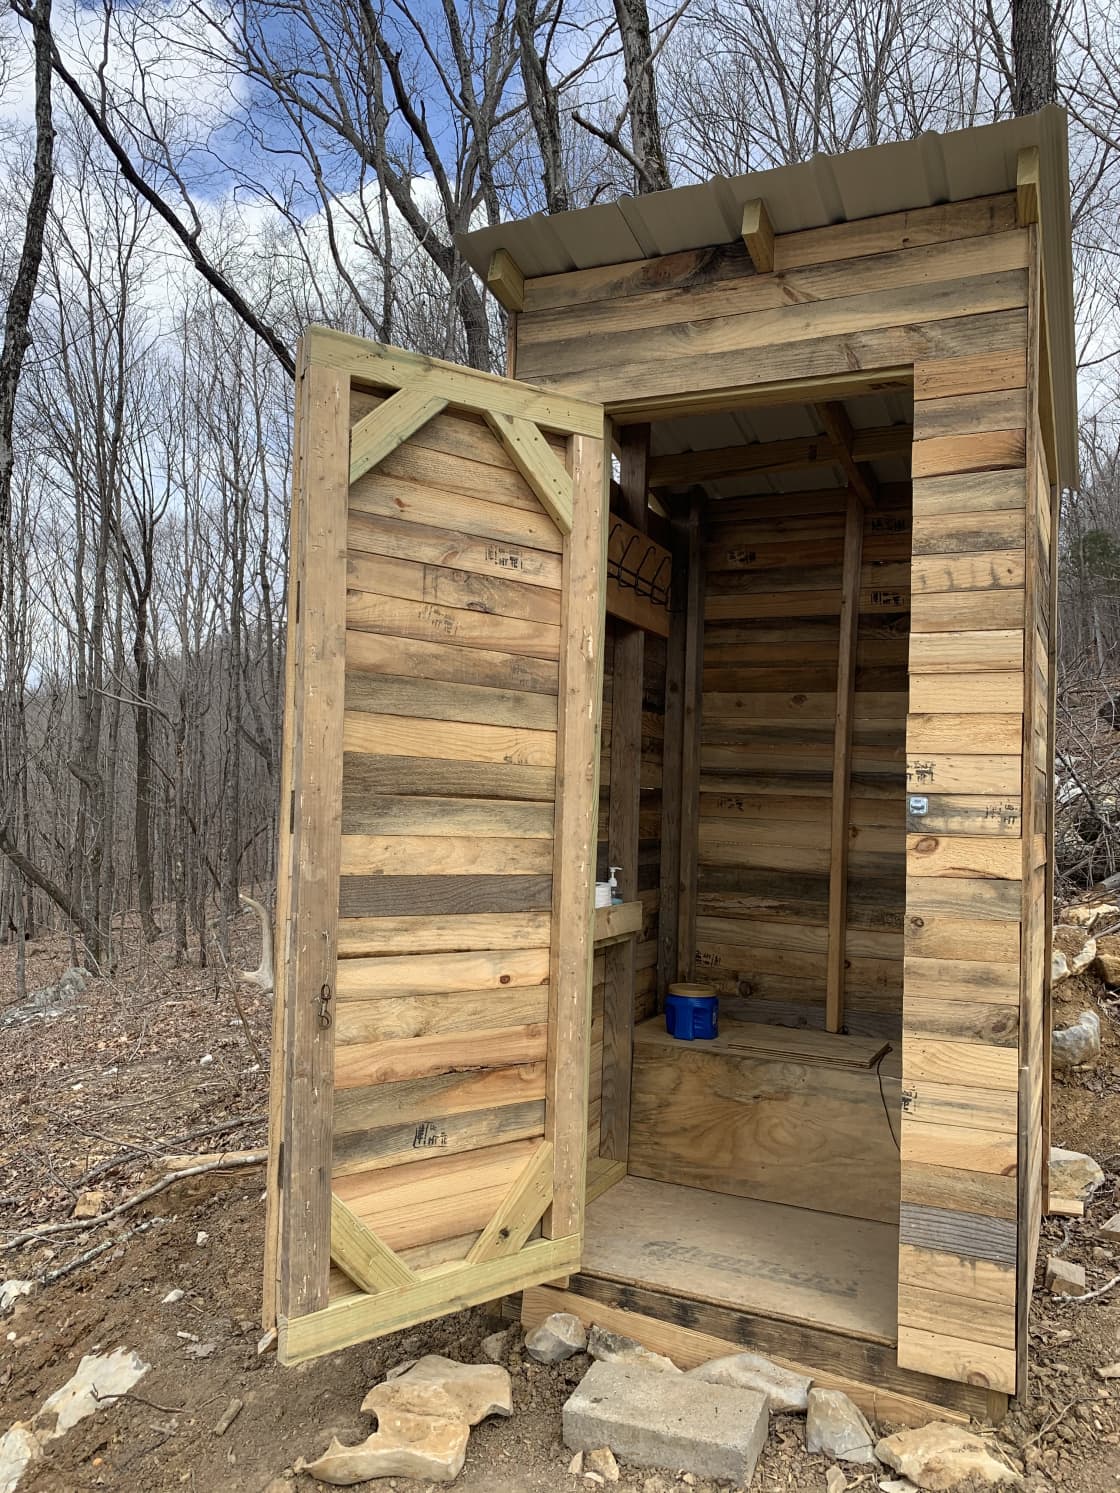 Inside the outhouse